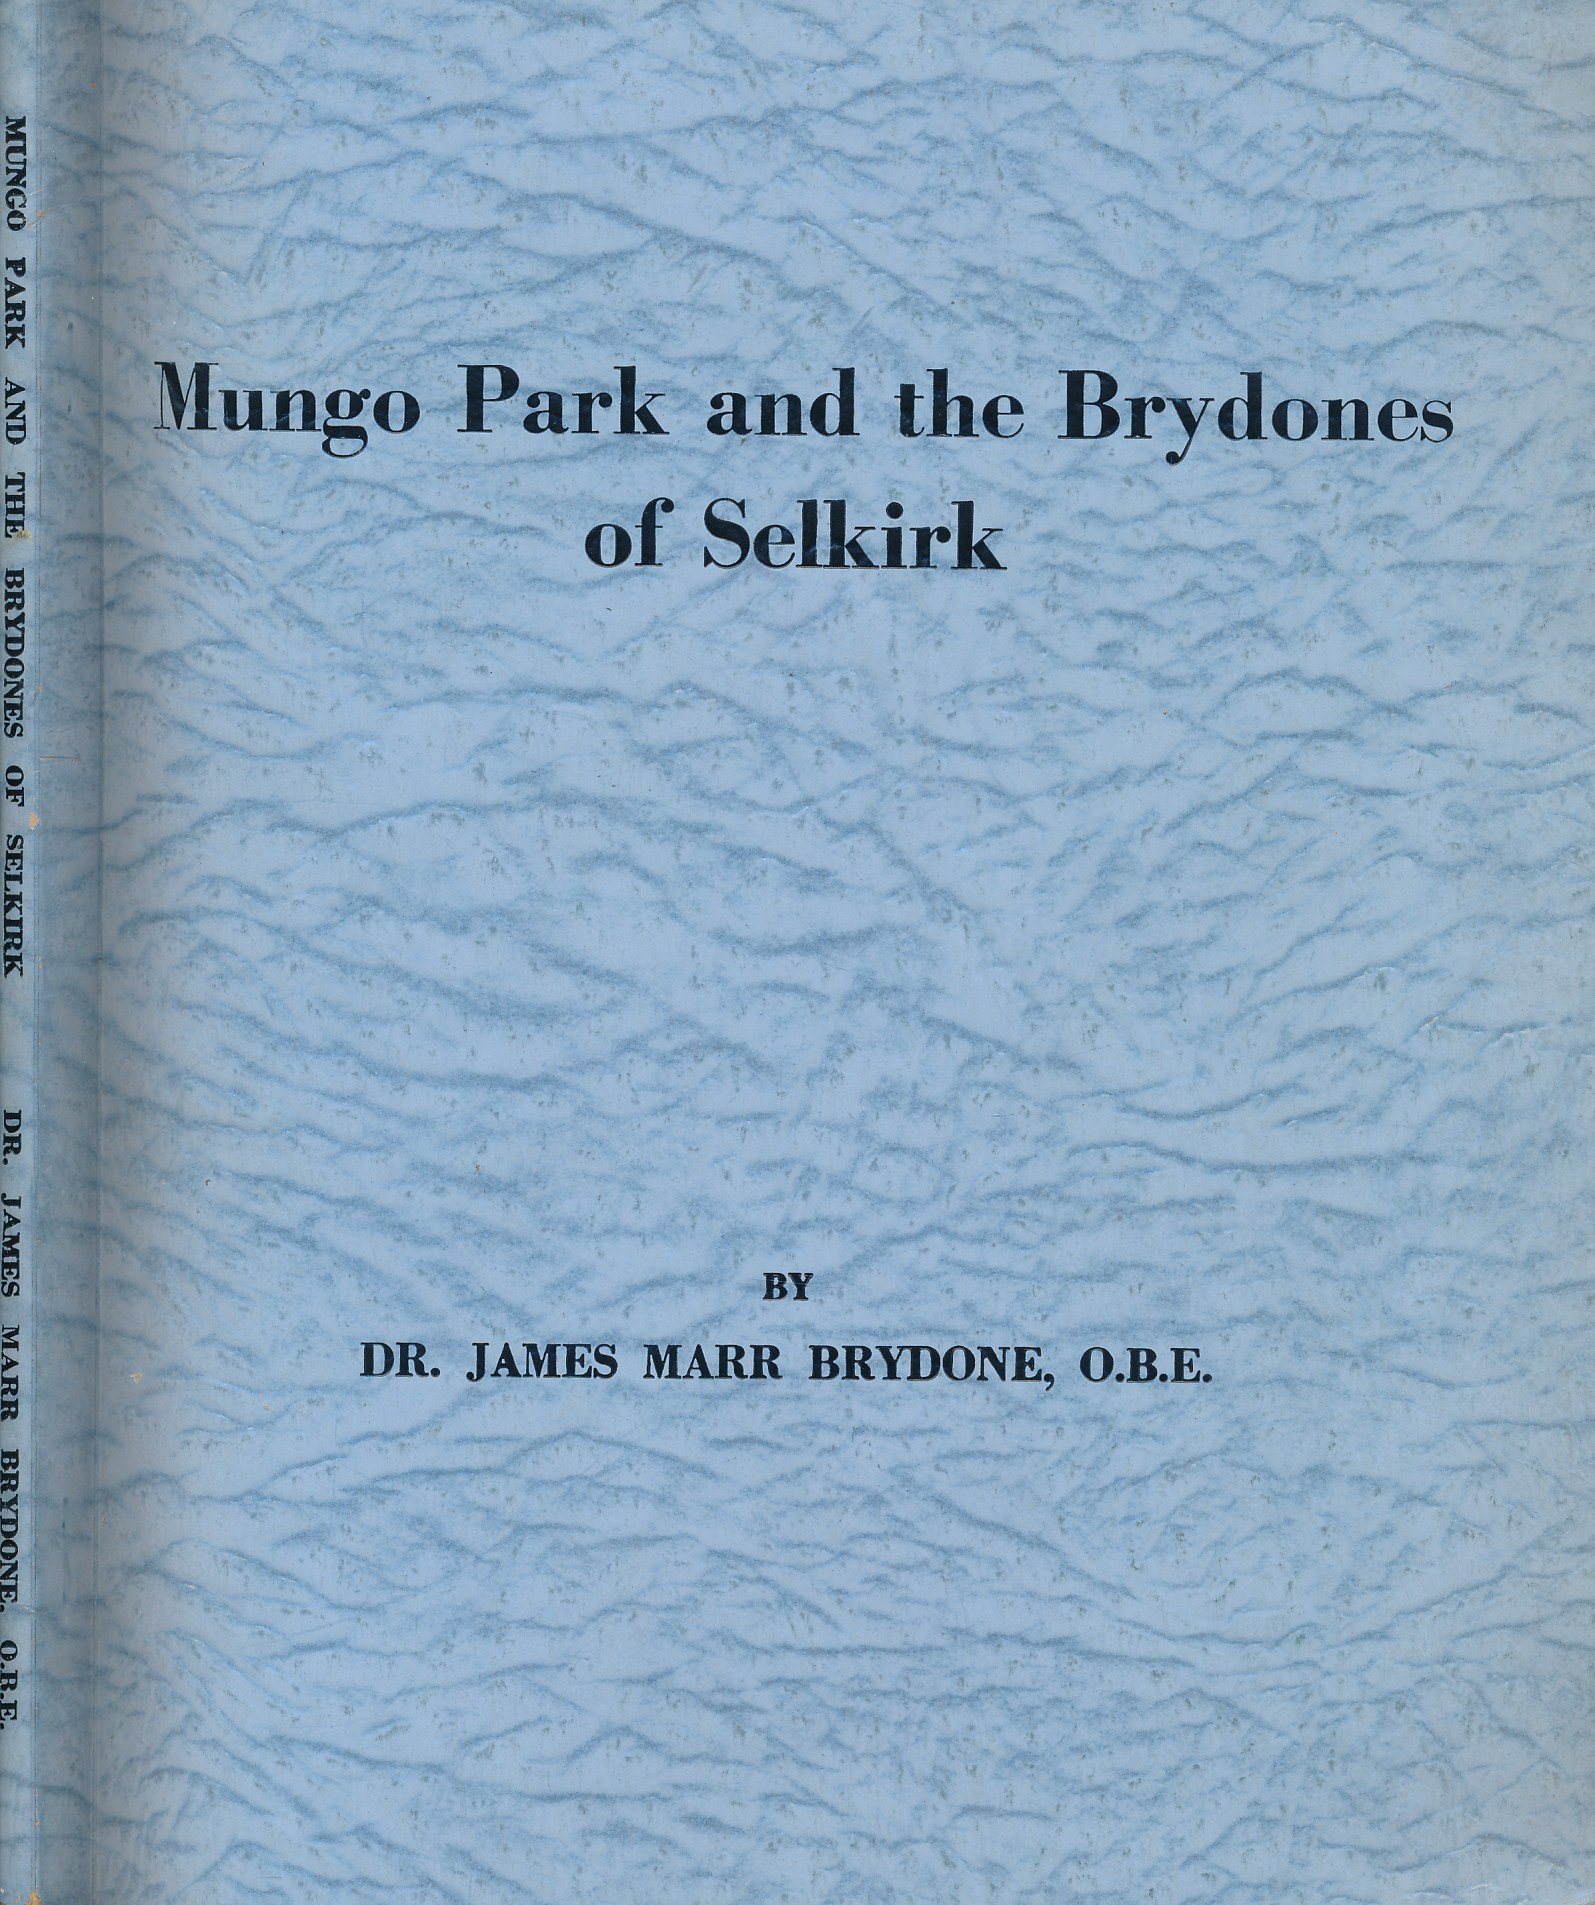 Mungo Park and the Brydones of Selkirk